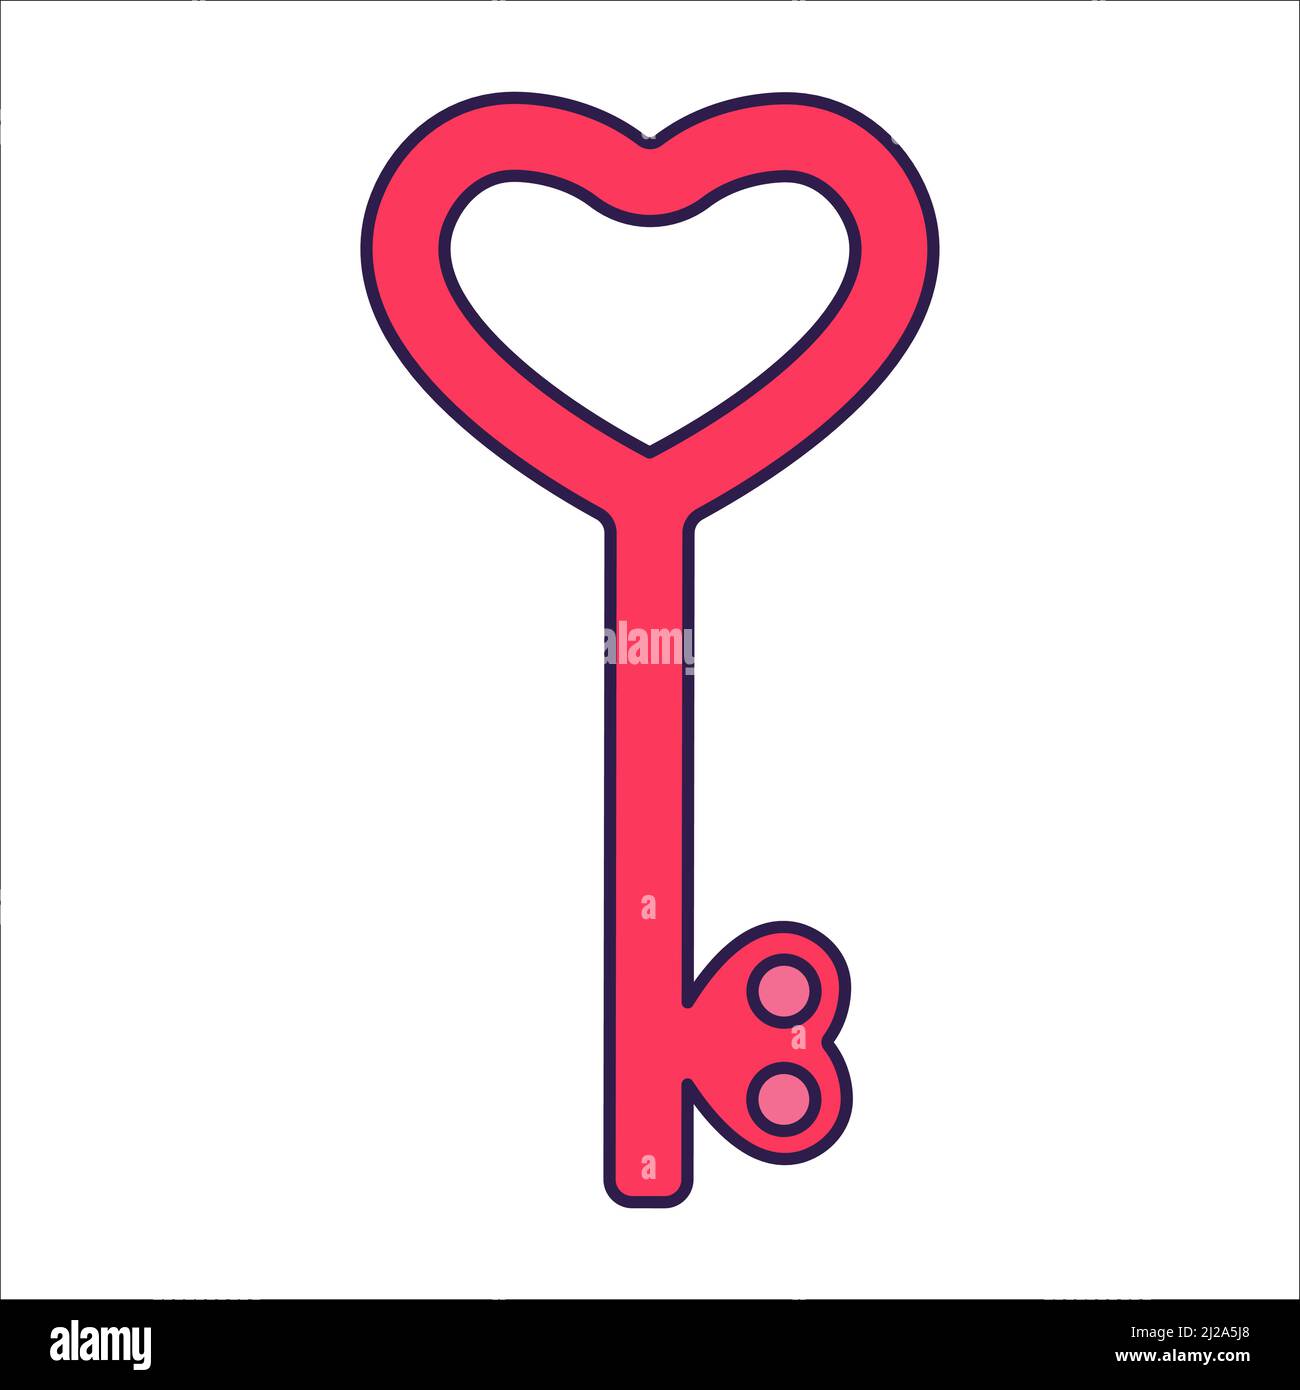 Retro Valentine Day icon key with hearts. Love symbol in the fashionable pop line art style. The cute figure is in soft pink, red, and coral color. Ve Stock Vector